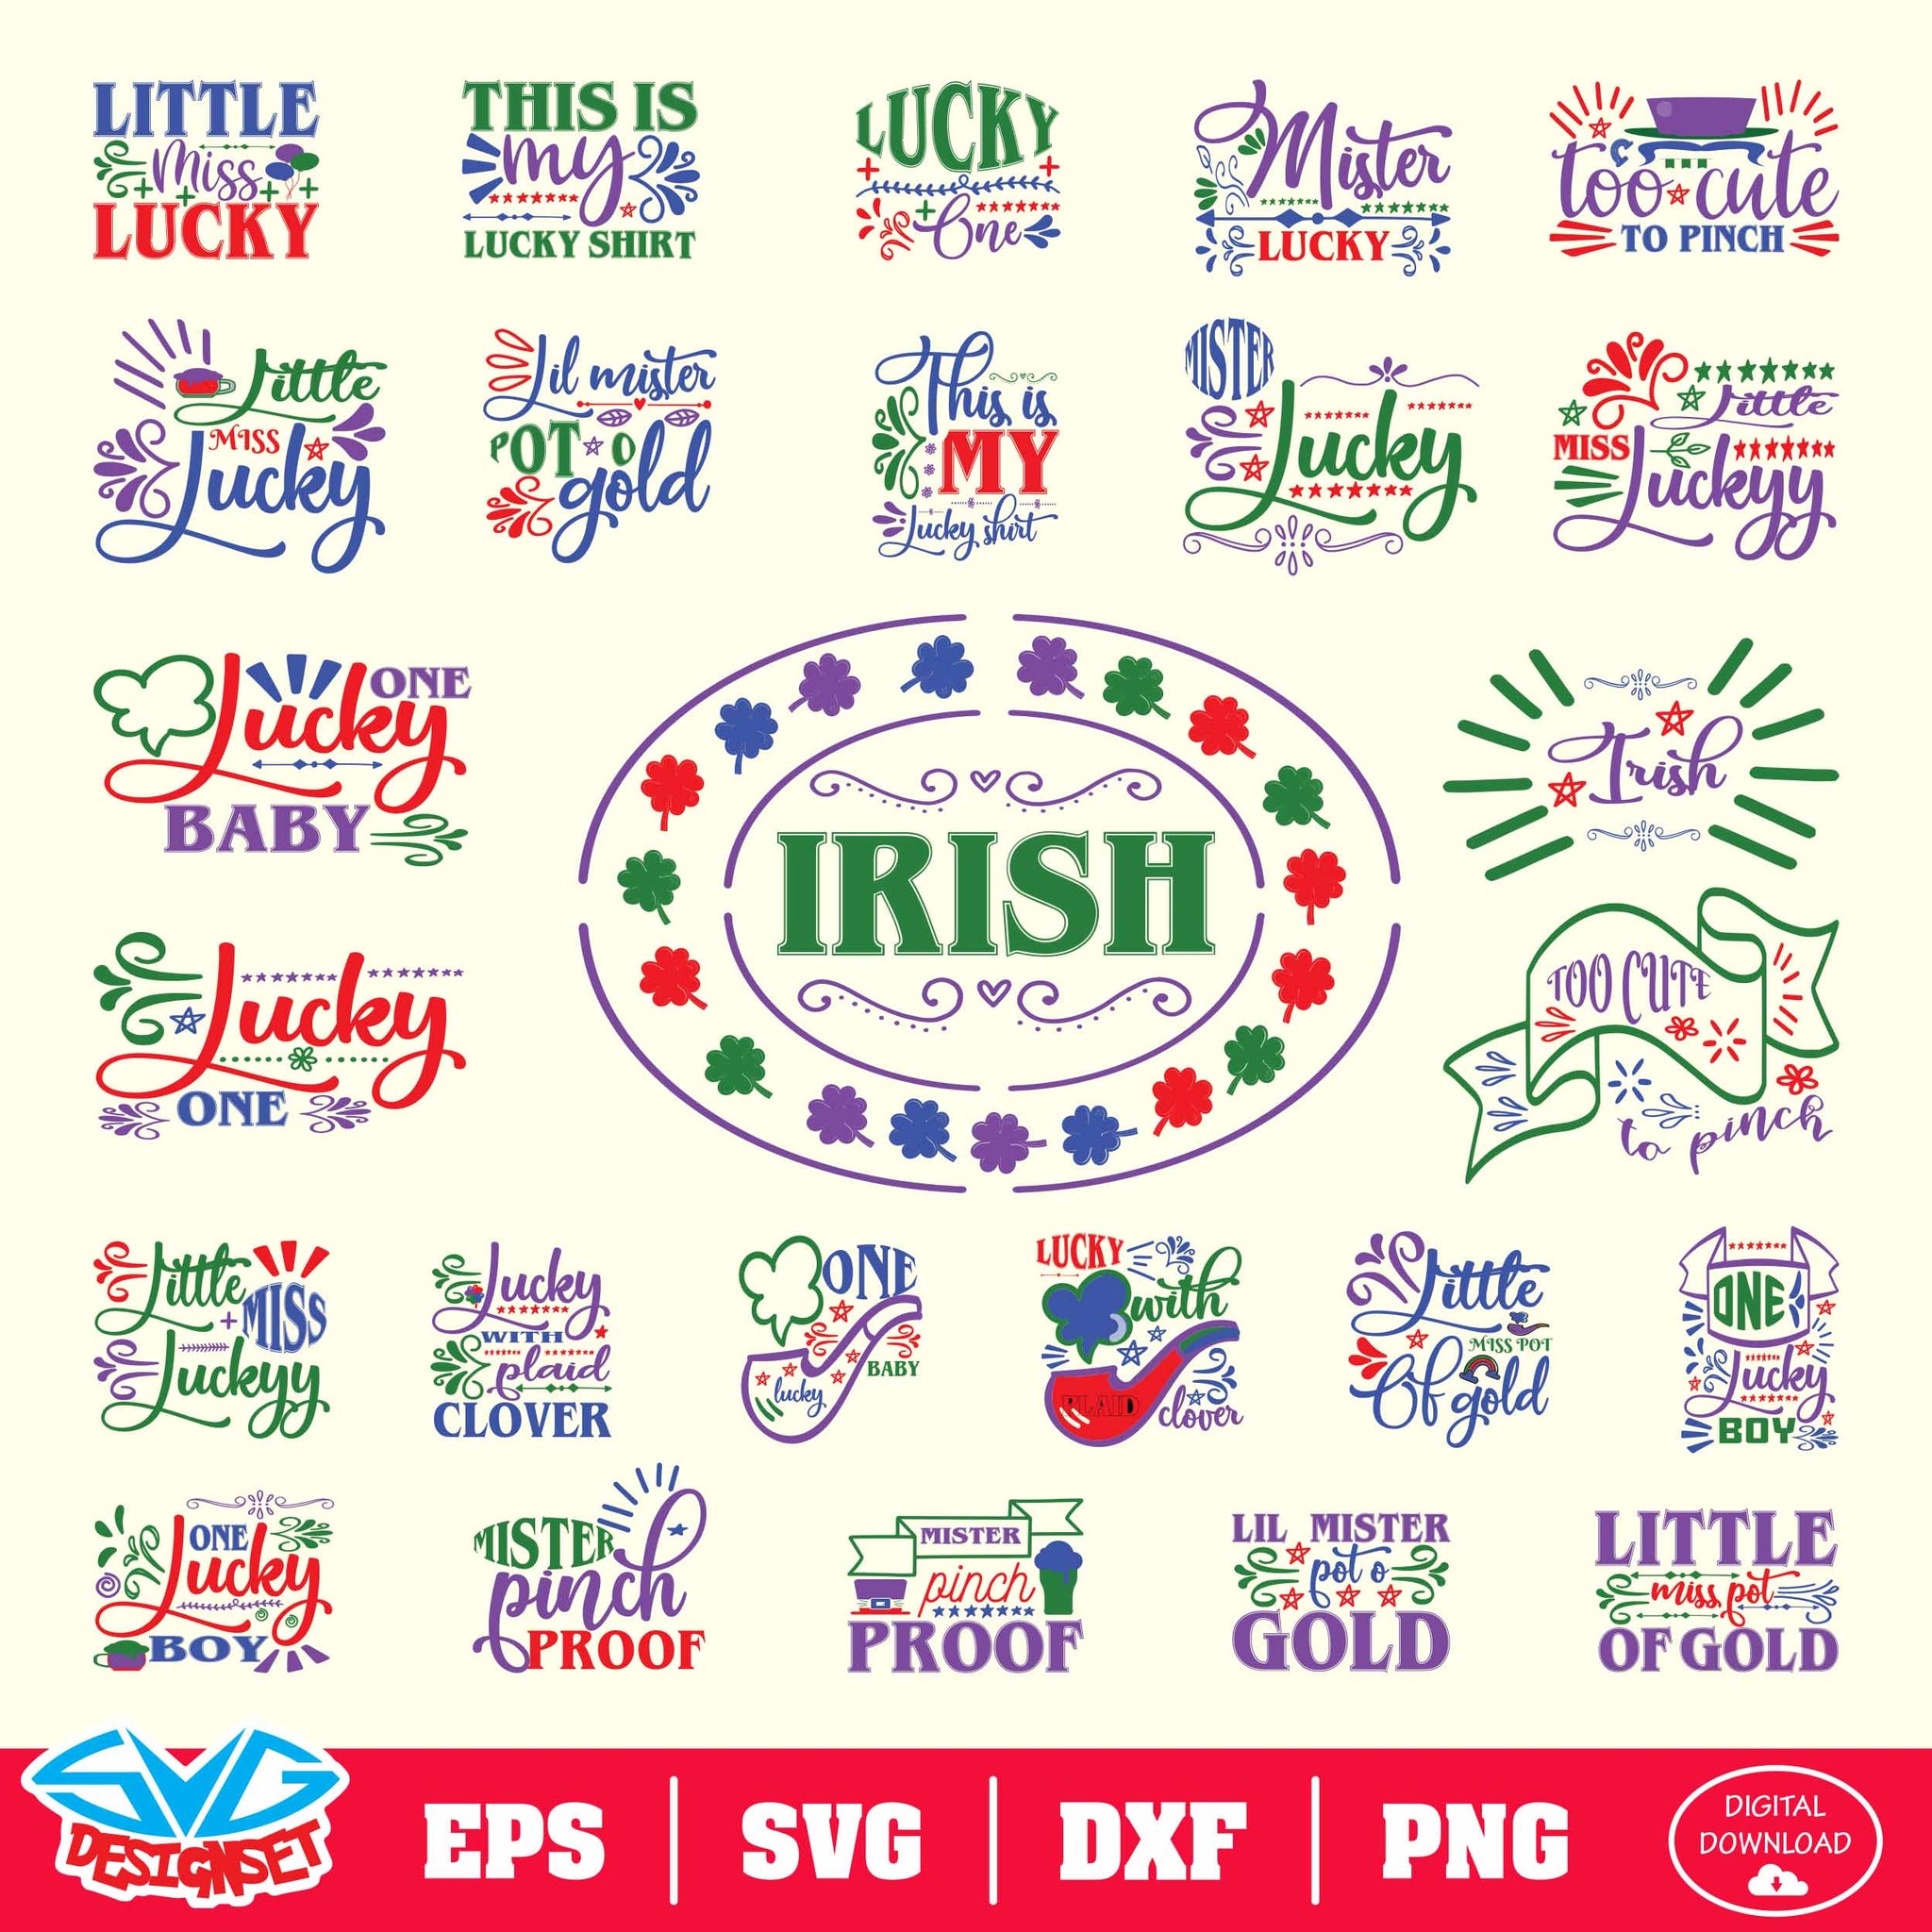 St. Patrick's Day Bundle Svg, Dxf, Eps, Png, Clipart, Silhouette and Cutfiles #005 - SVGDesignSets